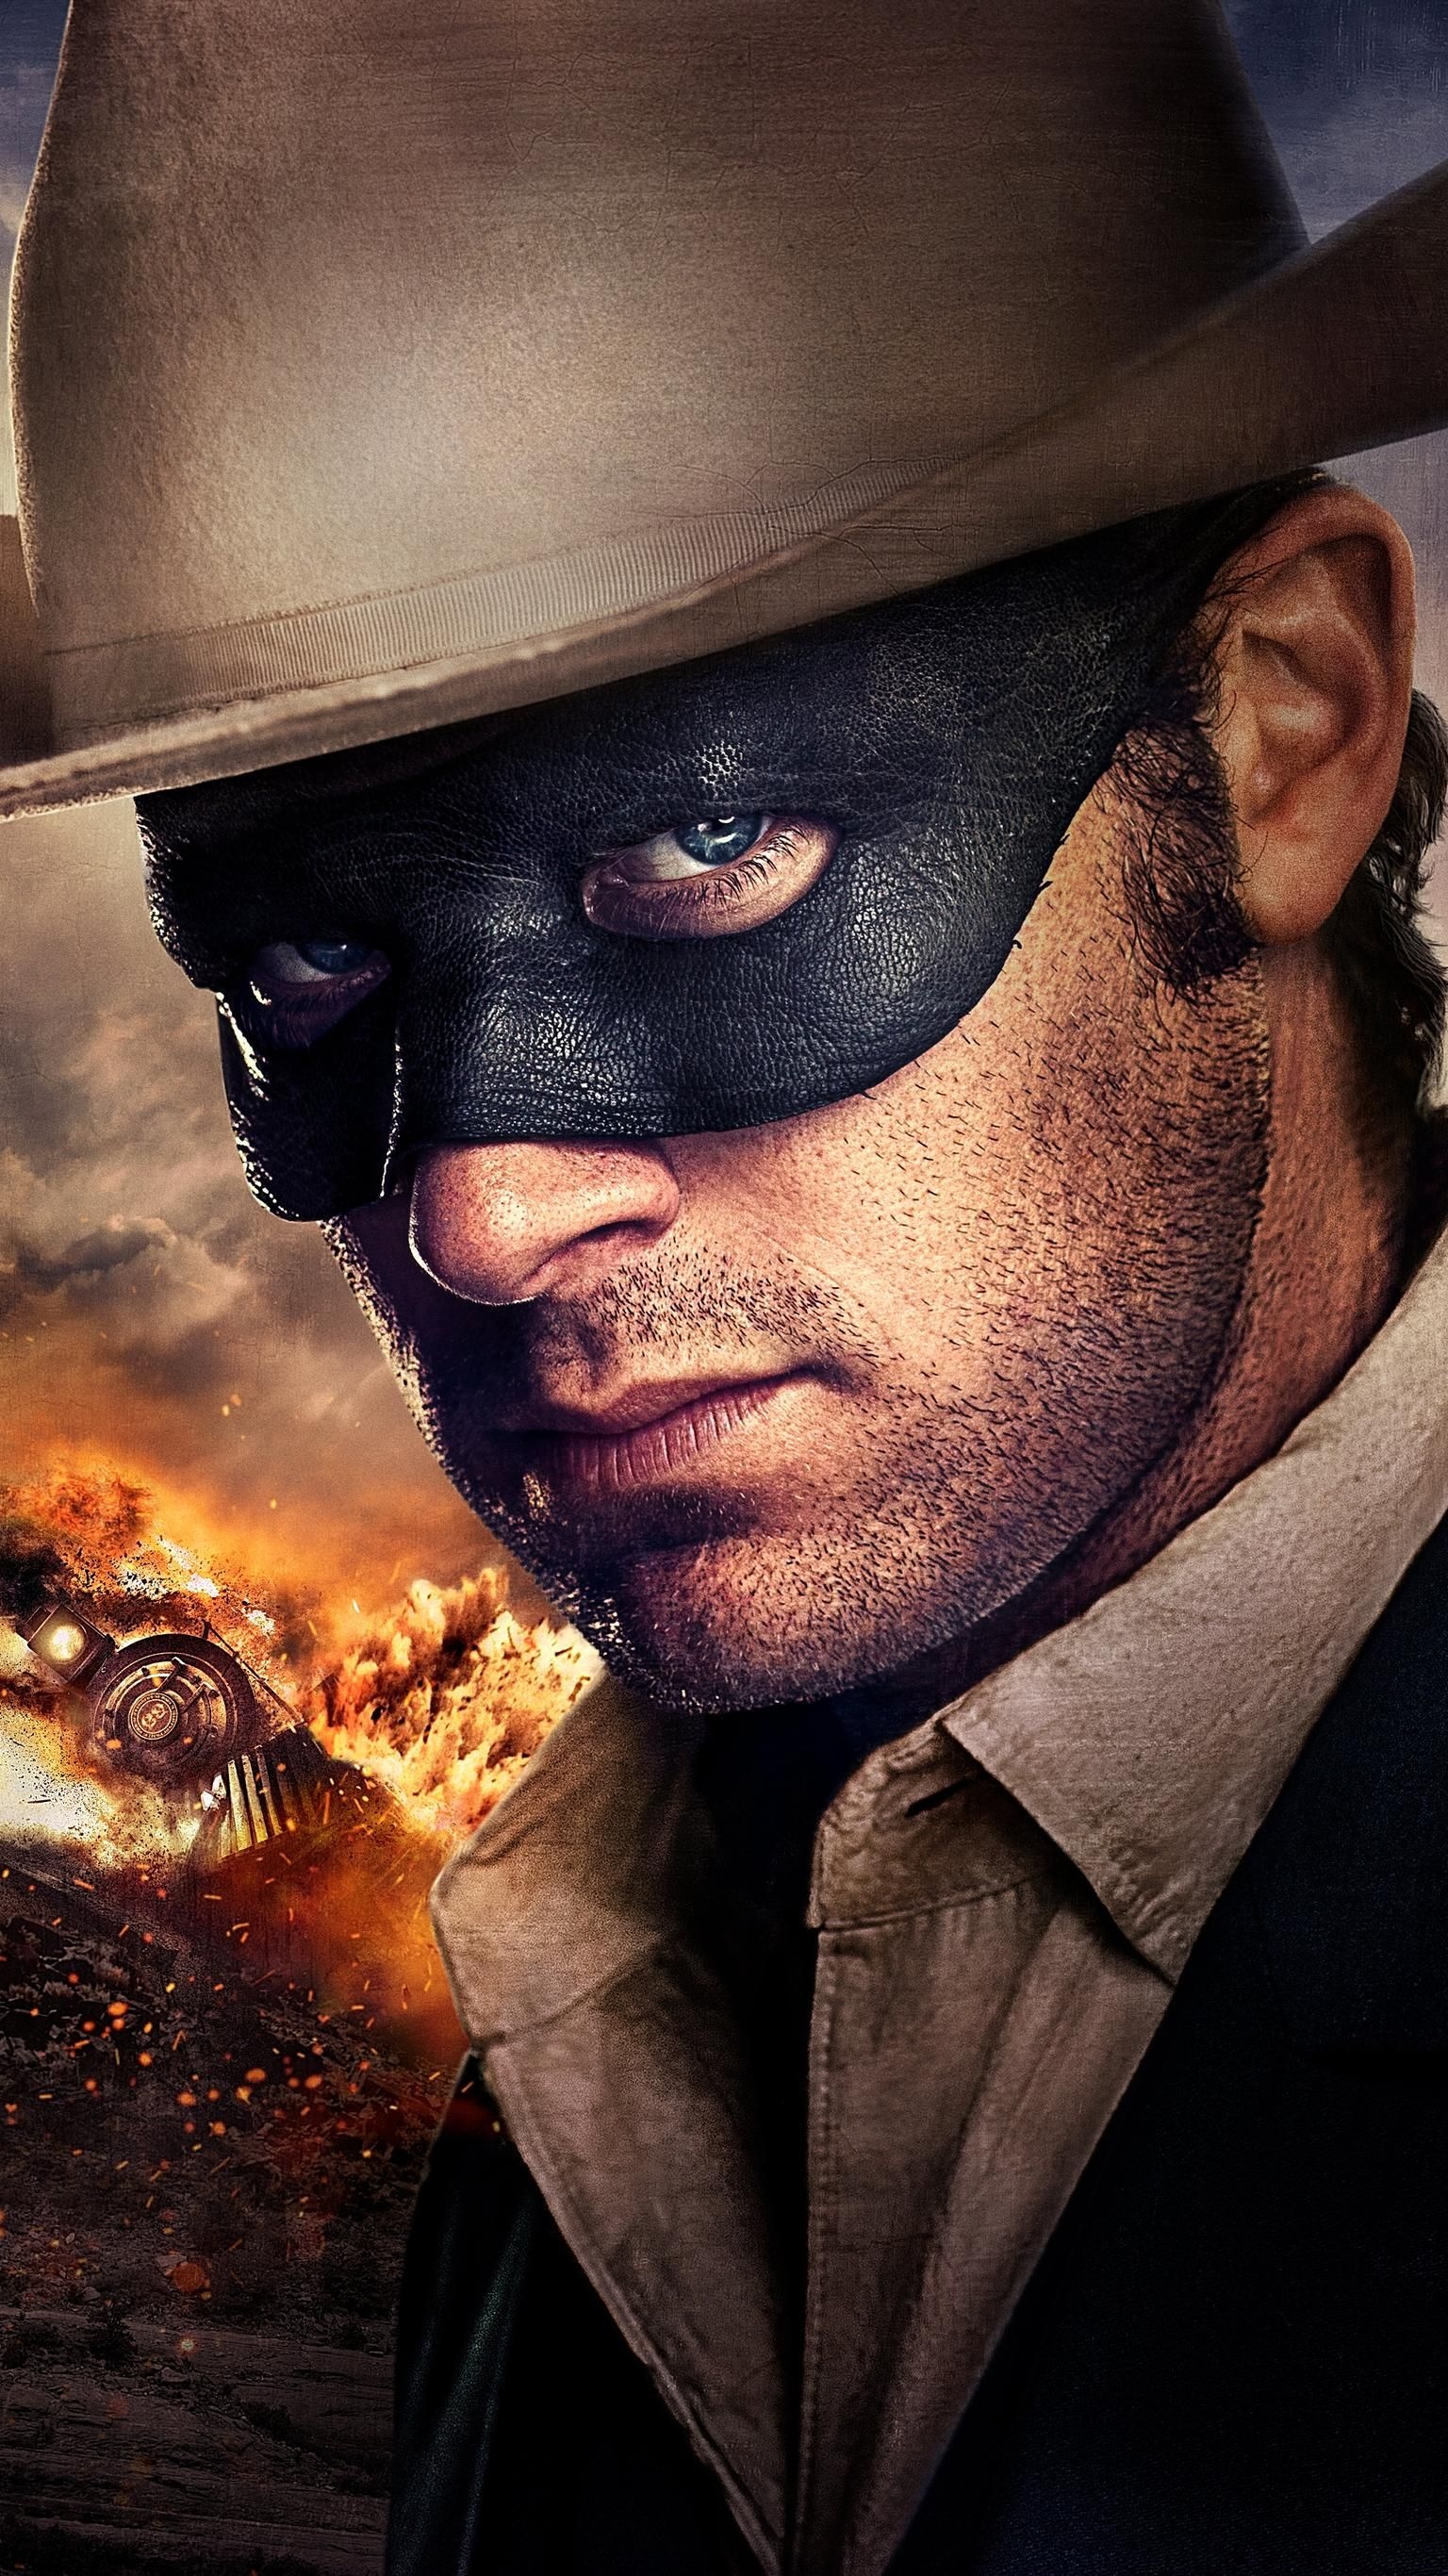 The Lone Ranger, Mobile wallpaper, Lone ranger theme, Iconic character, 1540x2740 HD Handy